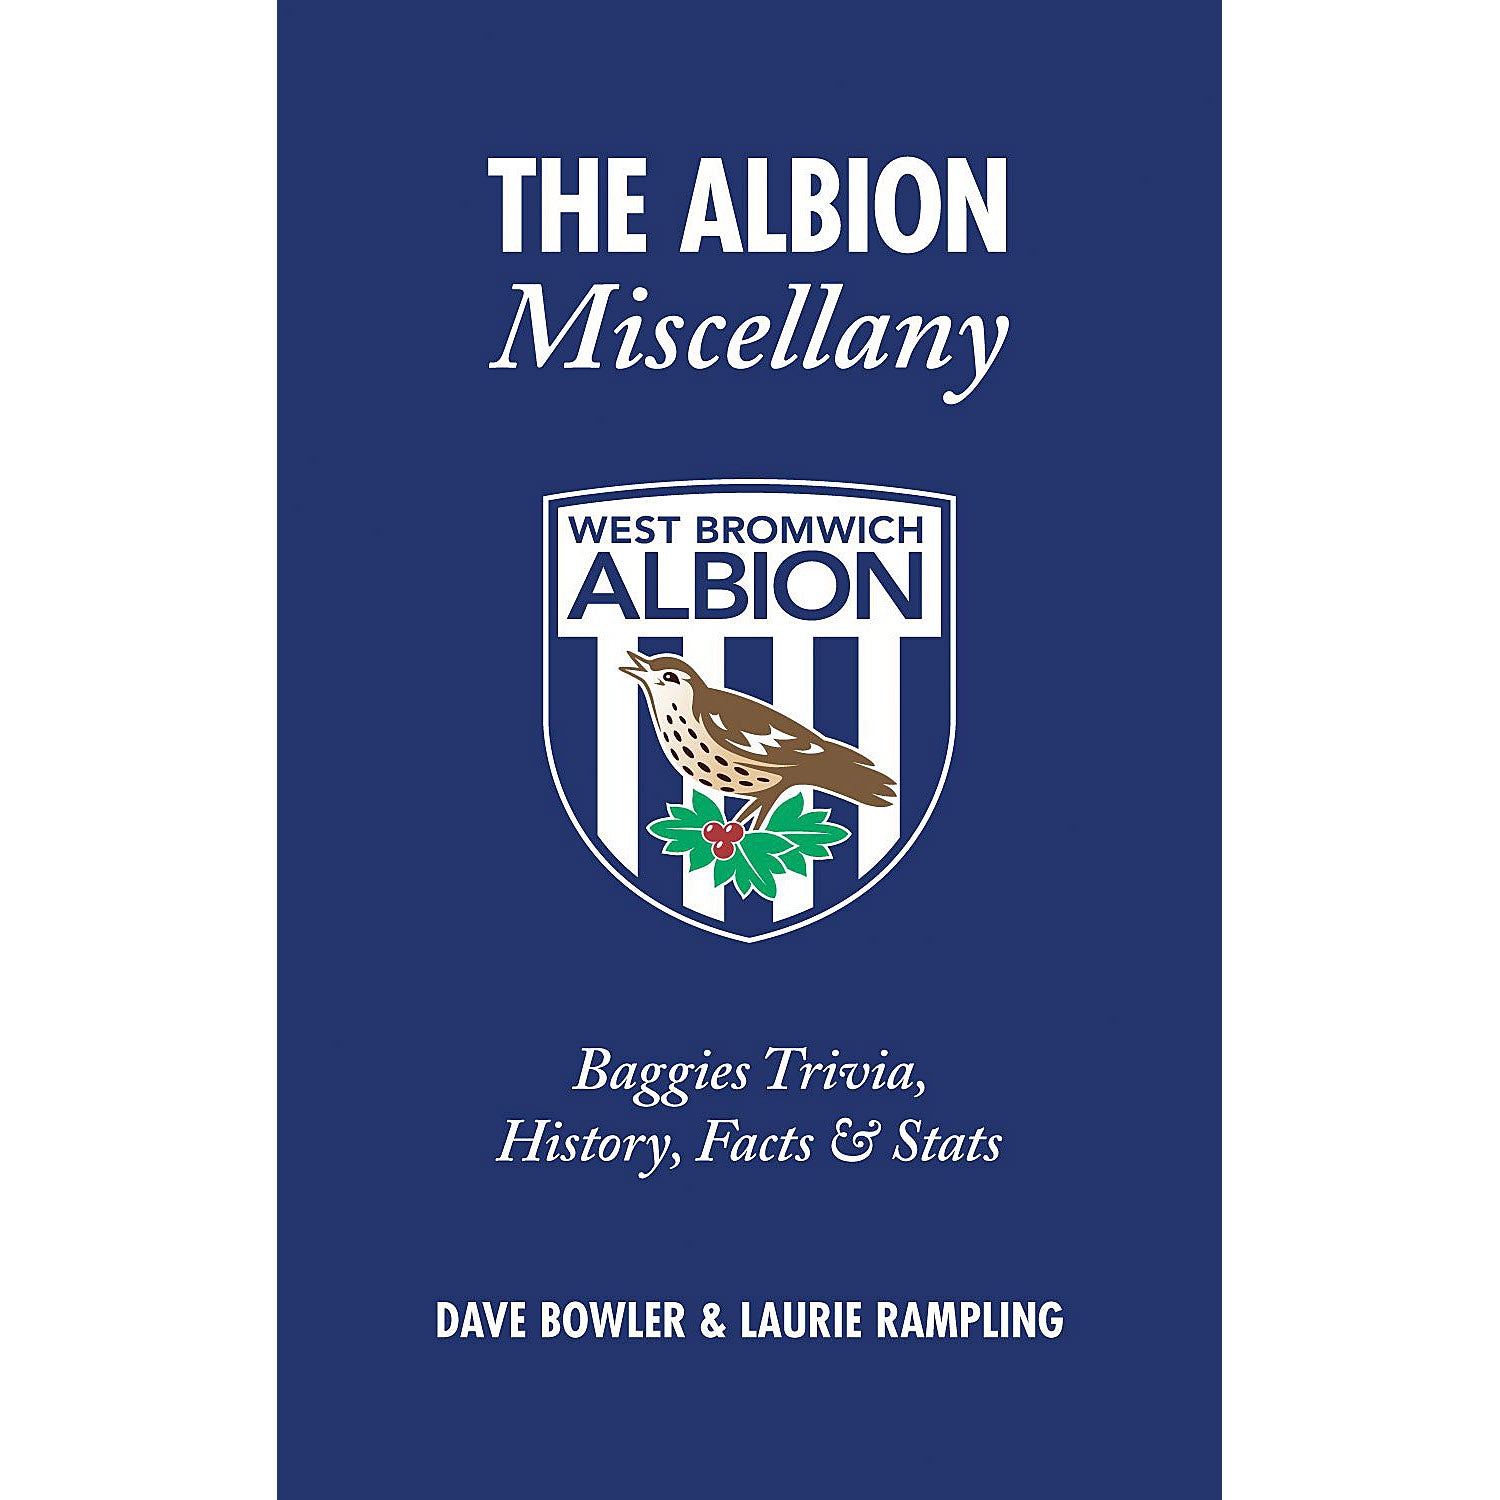 The Albion Miscellany – Baggies Trivia, History, Facts & Stats